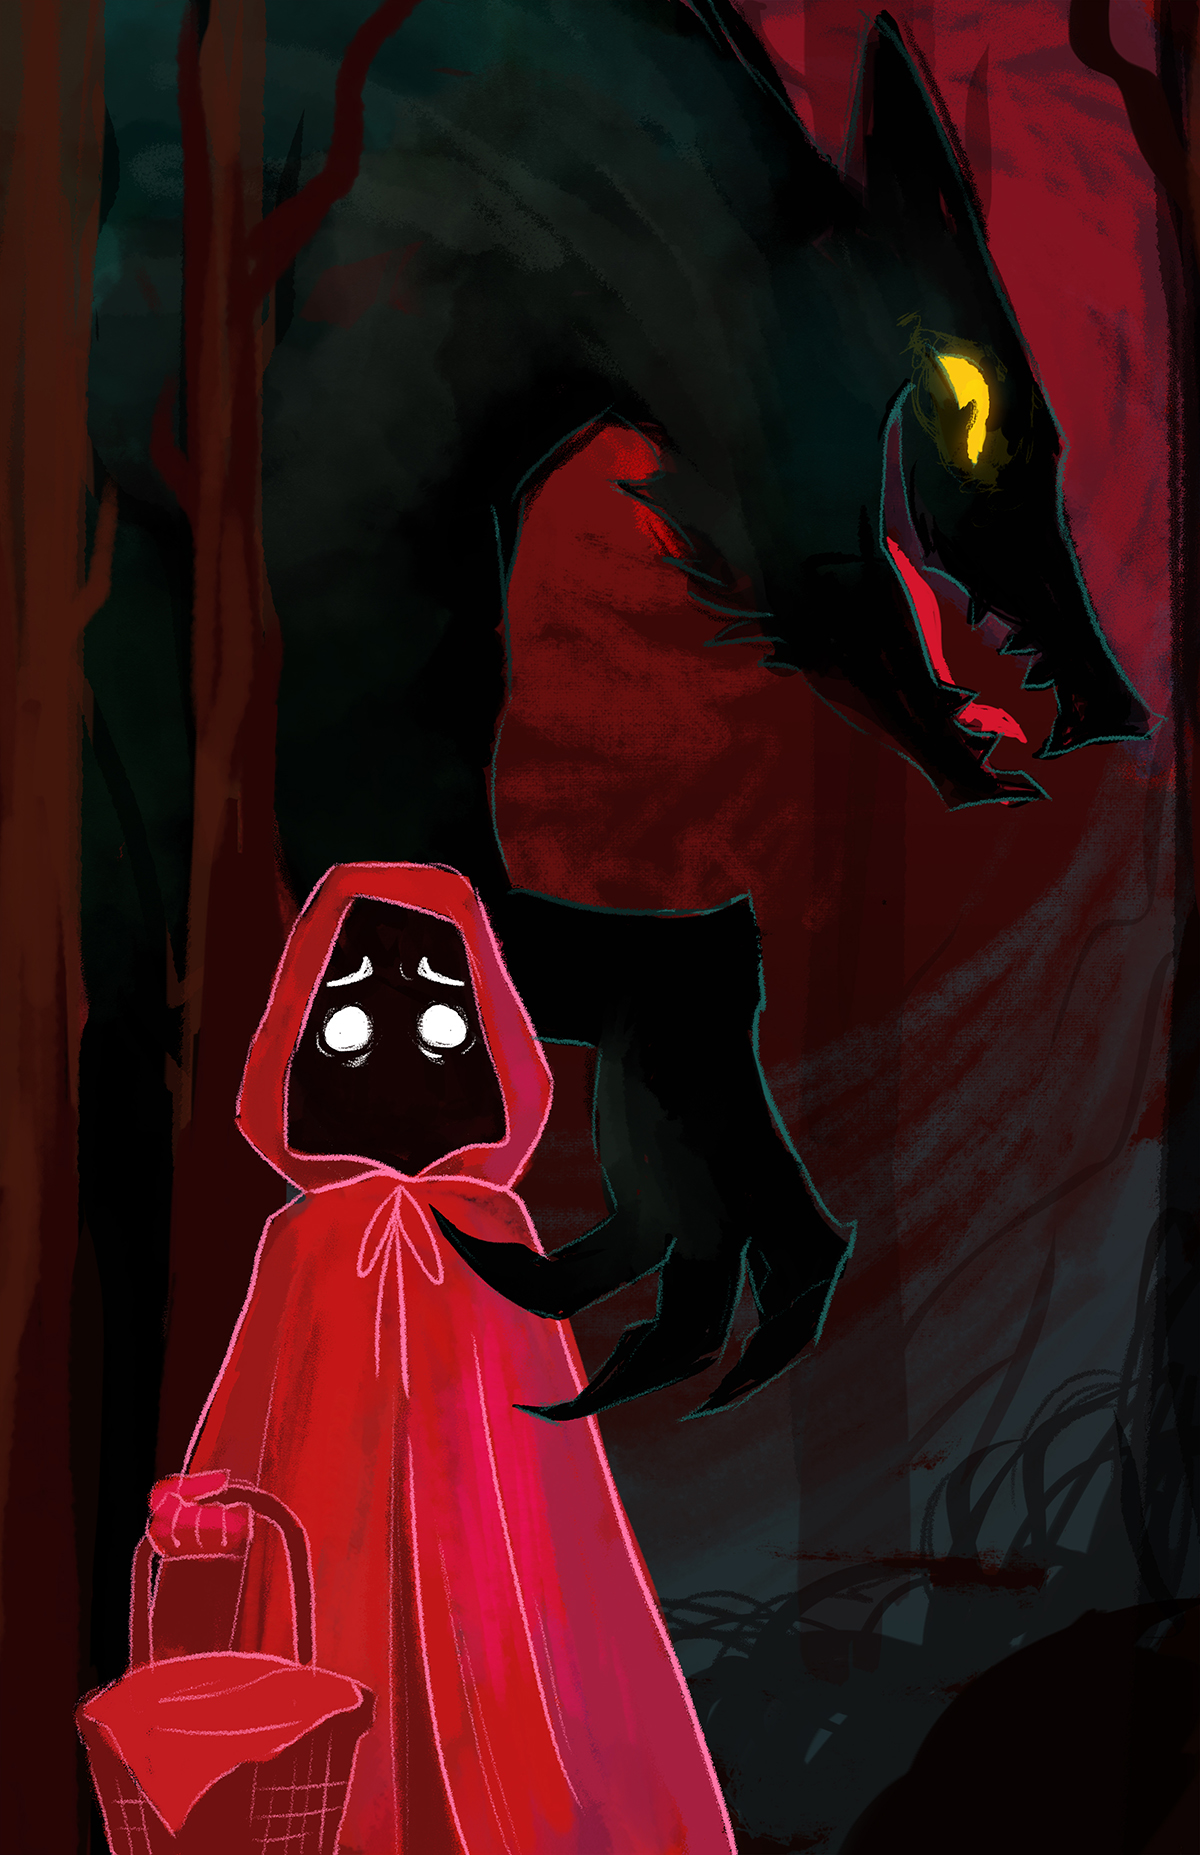 Digital illustration of little red riding hood in glowing red, and white fearful eyes shining from under hood, dark wolf like figure looming over her with claws at her shoulder